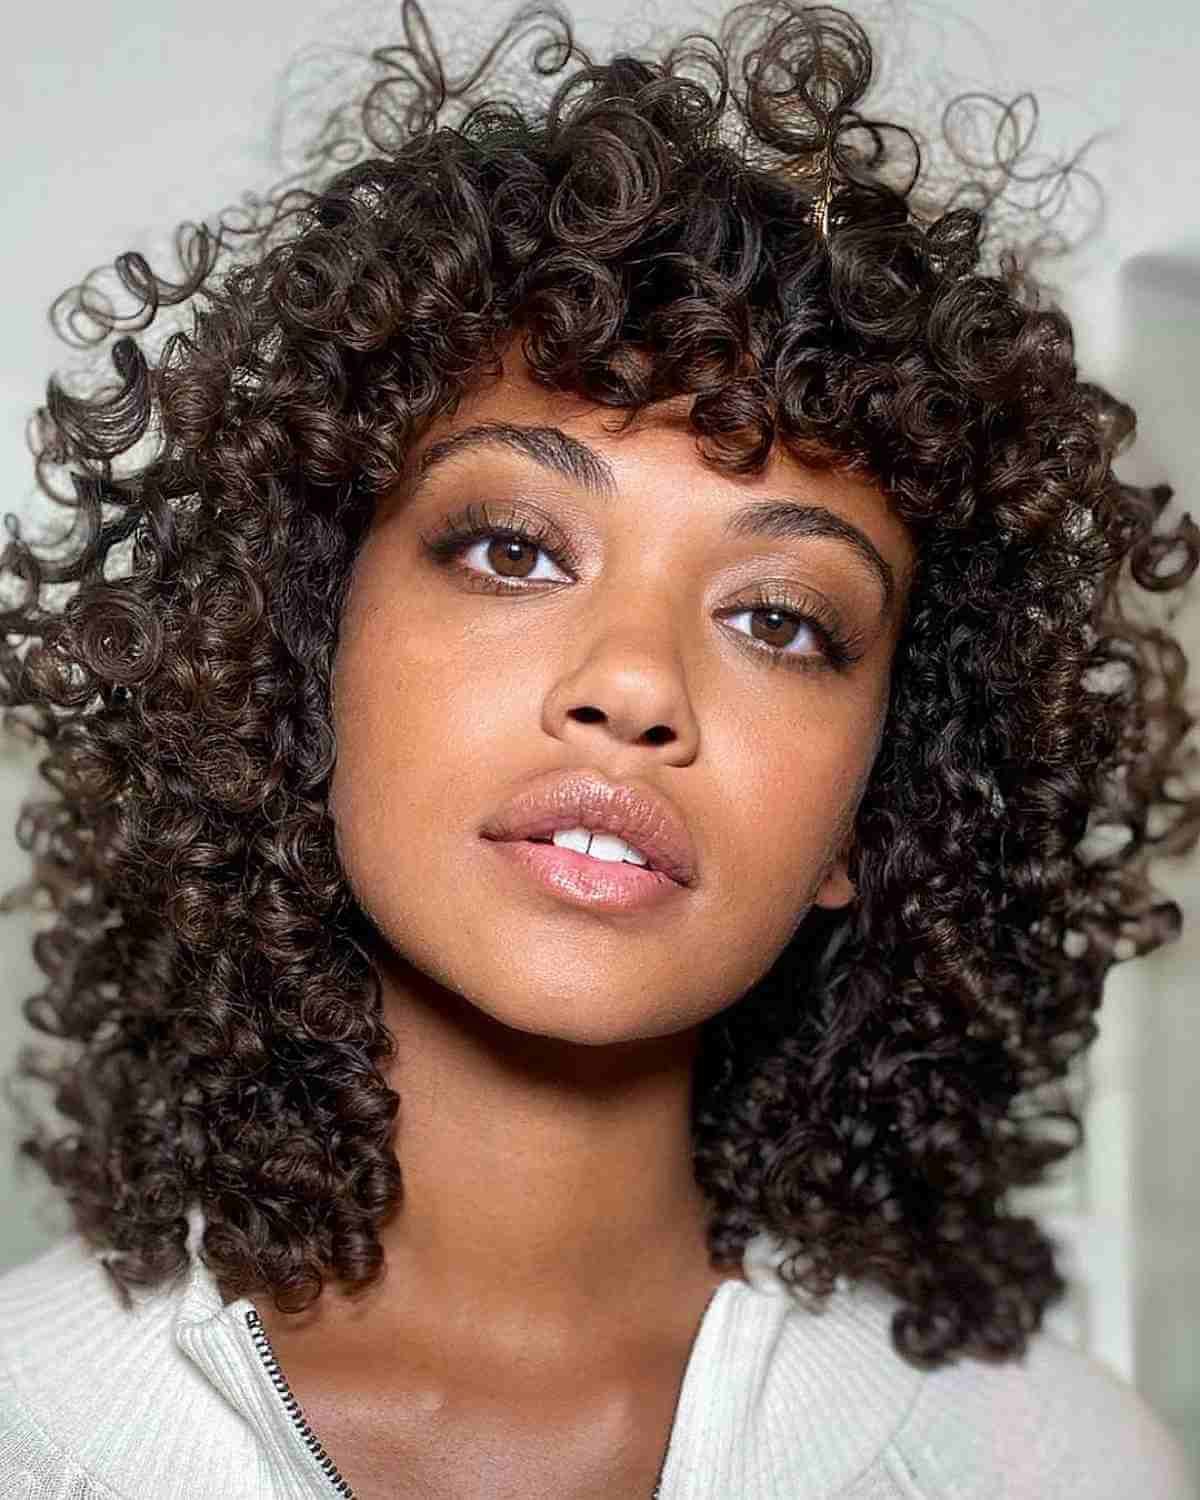 21 Stunning Long Curly Bob Haircuts – The Curly Lob For Recent Curly Lob Haircuts With Feathered Ends (View 22 of 25)